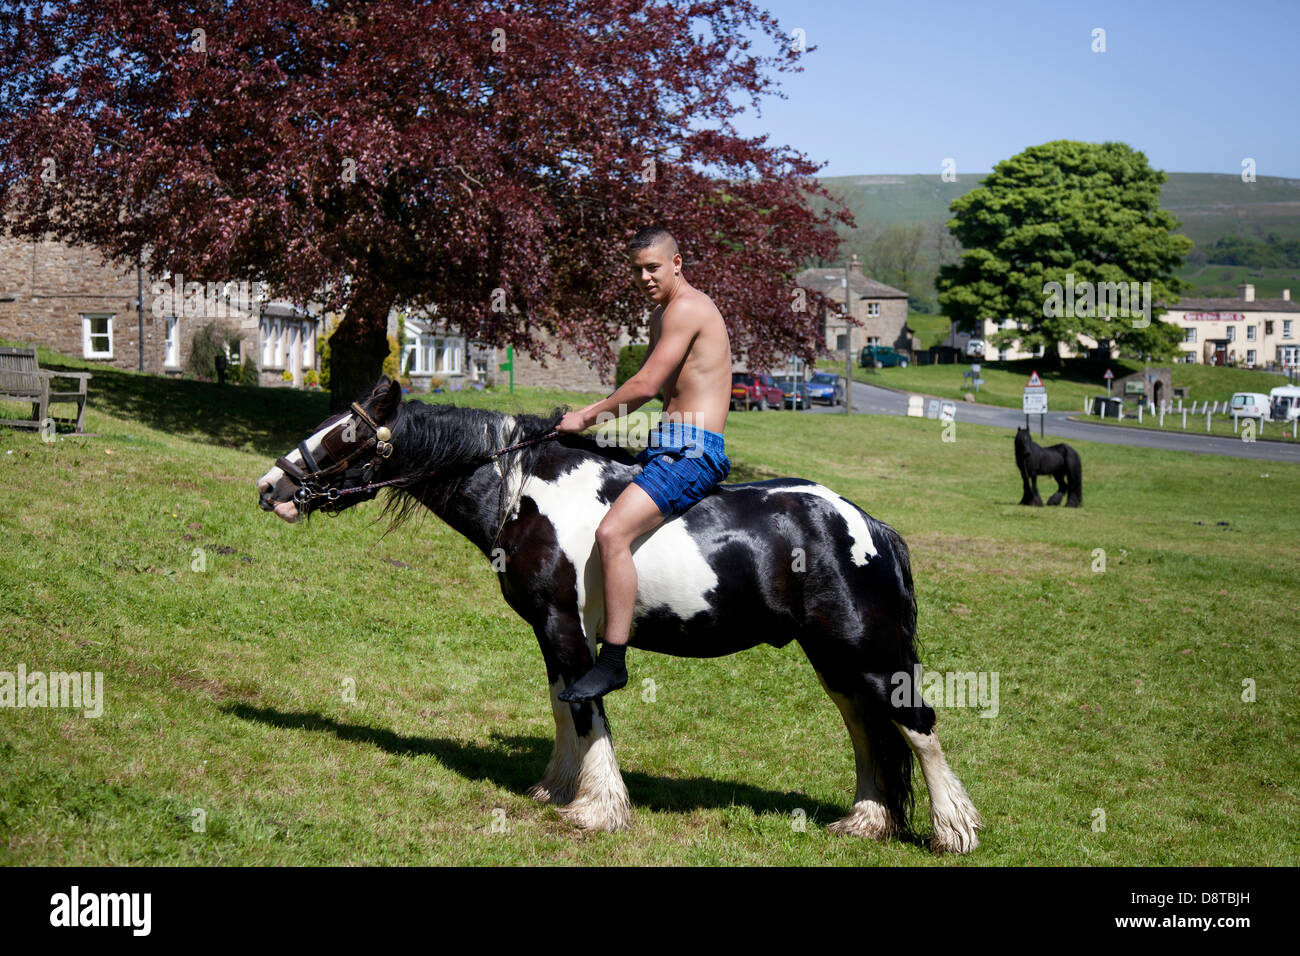 Gypsy travellers in Bainbridge, Richmondshire, North Yorkshire, UK. 4th June, 2013. Brad Hill, 17 riding a Cob horse on the village green a member of the travelling community en-route to the Appleby Horse Fair in Cumbria.  The Fair is an annual gathering of Gypsies and Travellers which takes place on the first week in June, and has taken place since the reign of James II, who granted a Royal charter in 1685 allowing a horse fair 'near to the River Eden'. Stock Photo